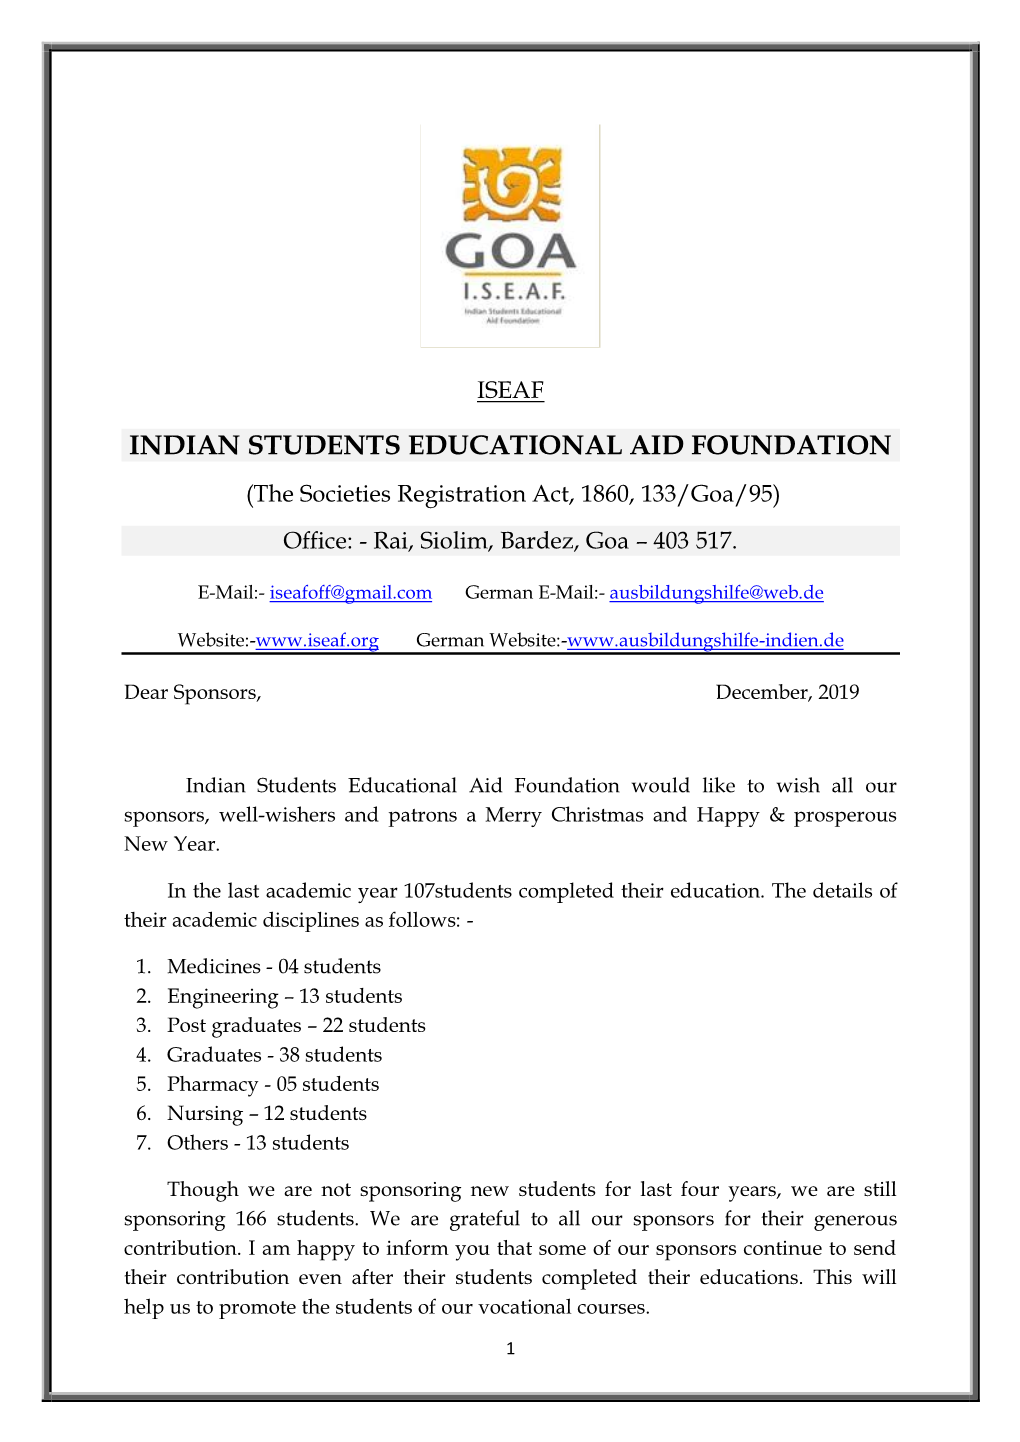 Indian Students Educational Aid Foundation